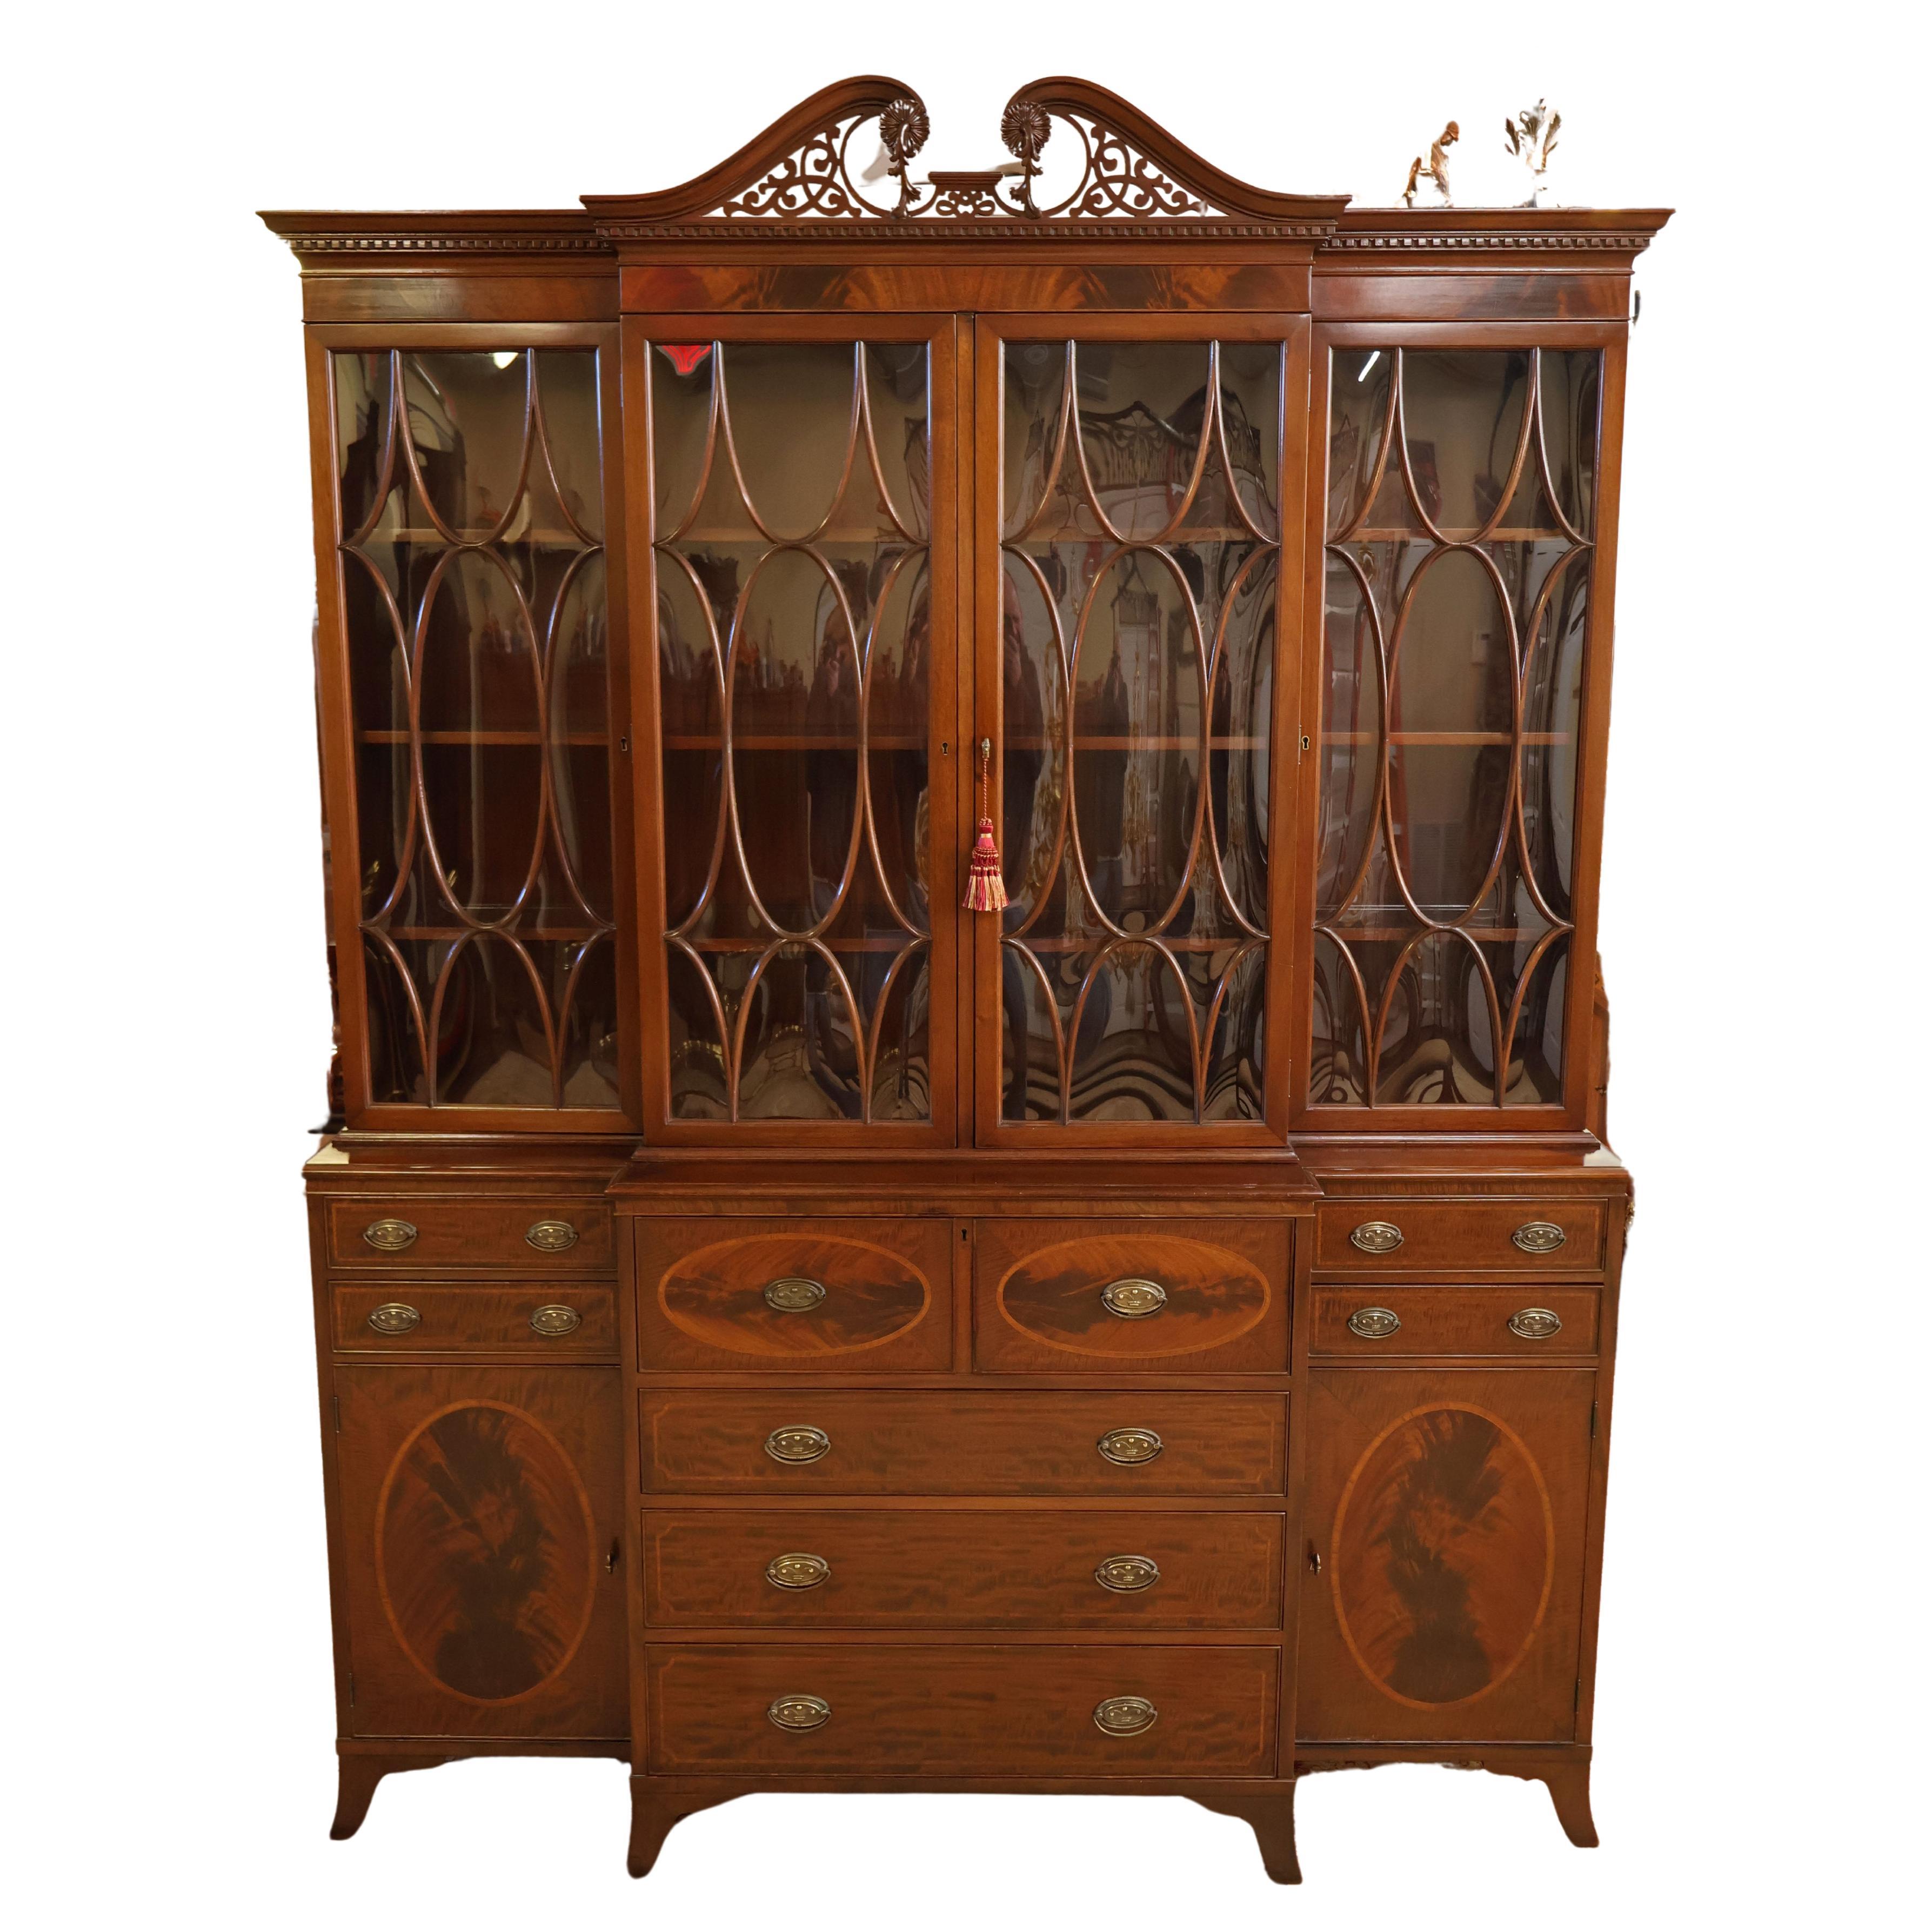 Early 20th Century Flame Mahogany Cabinet Bookcase Breakfront By Warsaw For Sale